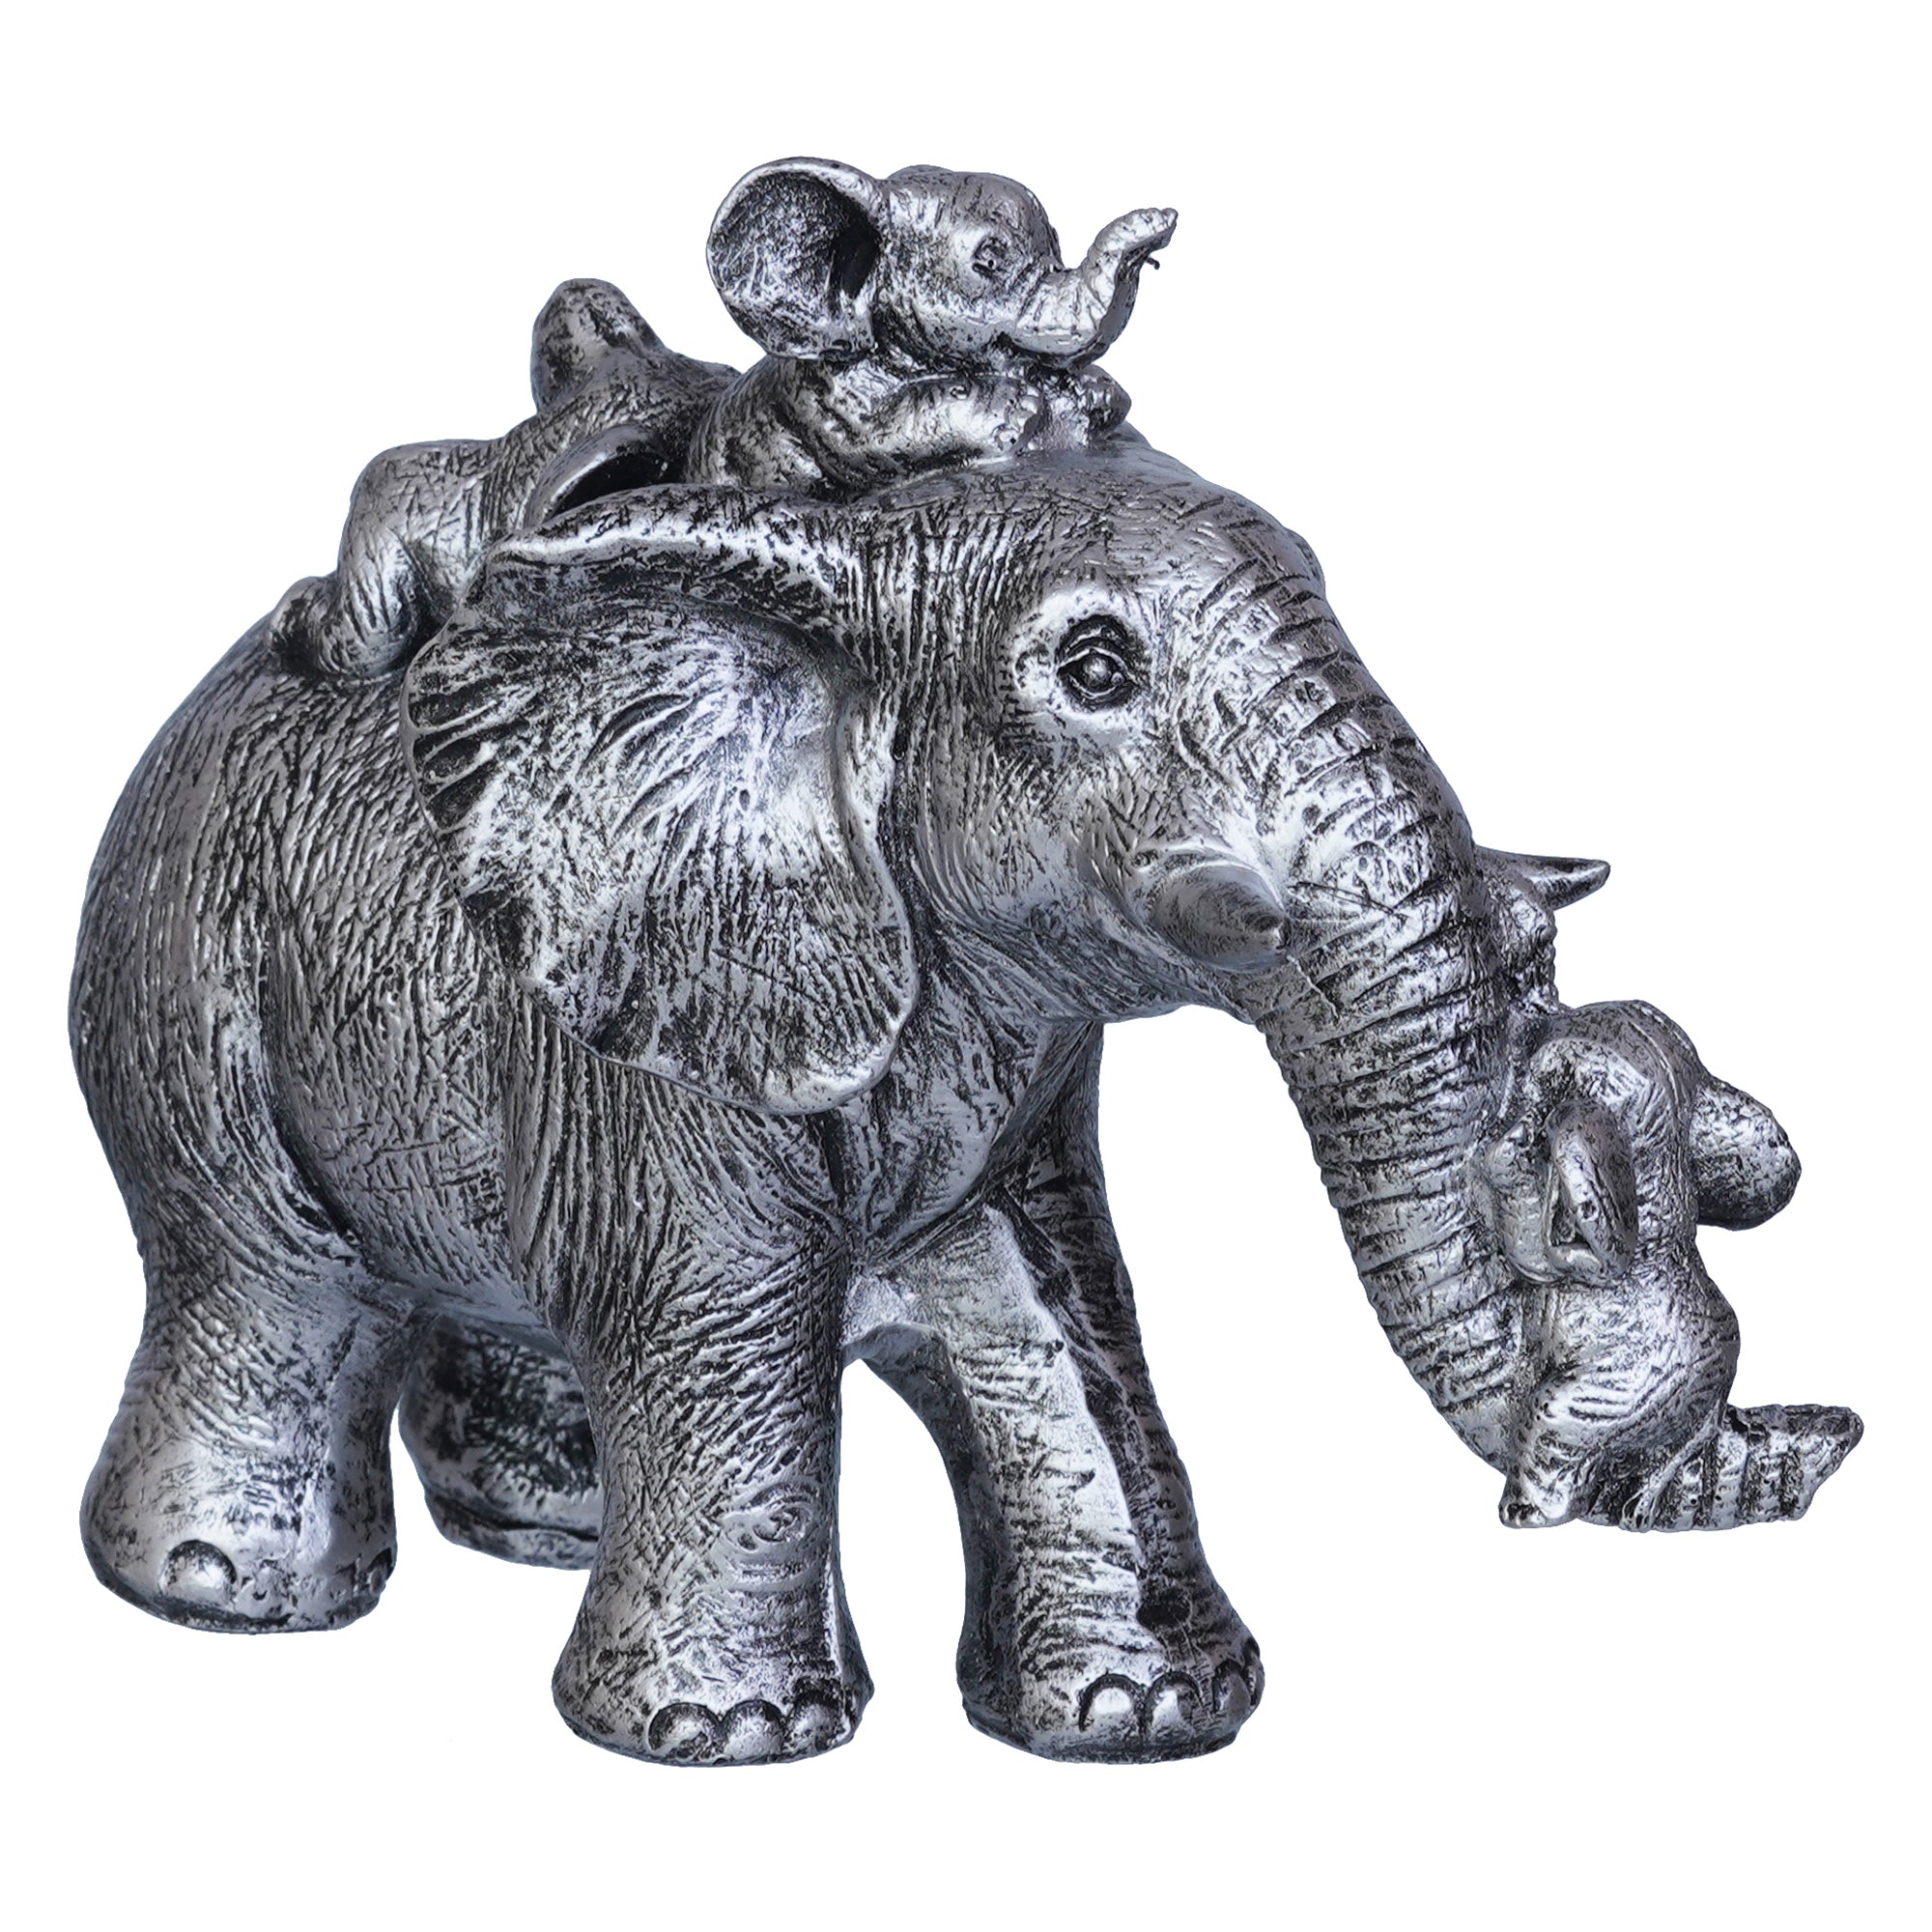 Cute Silver Elephant Statue Carries Three Calves on Its Back and Trunk 7